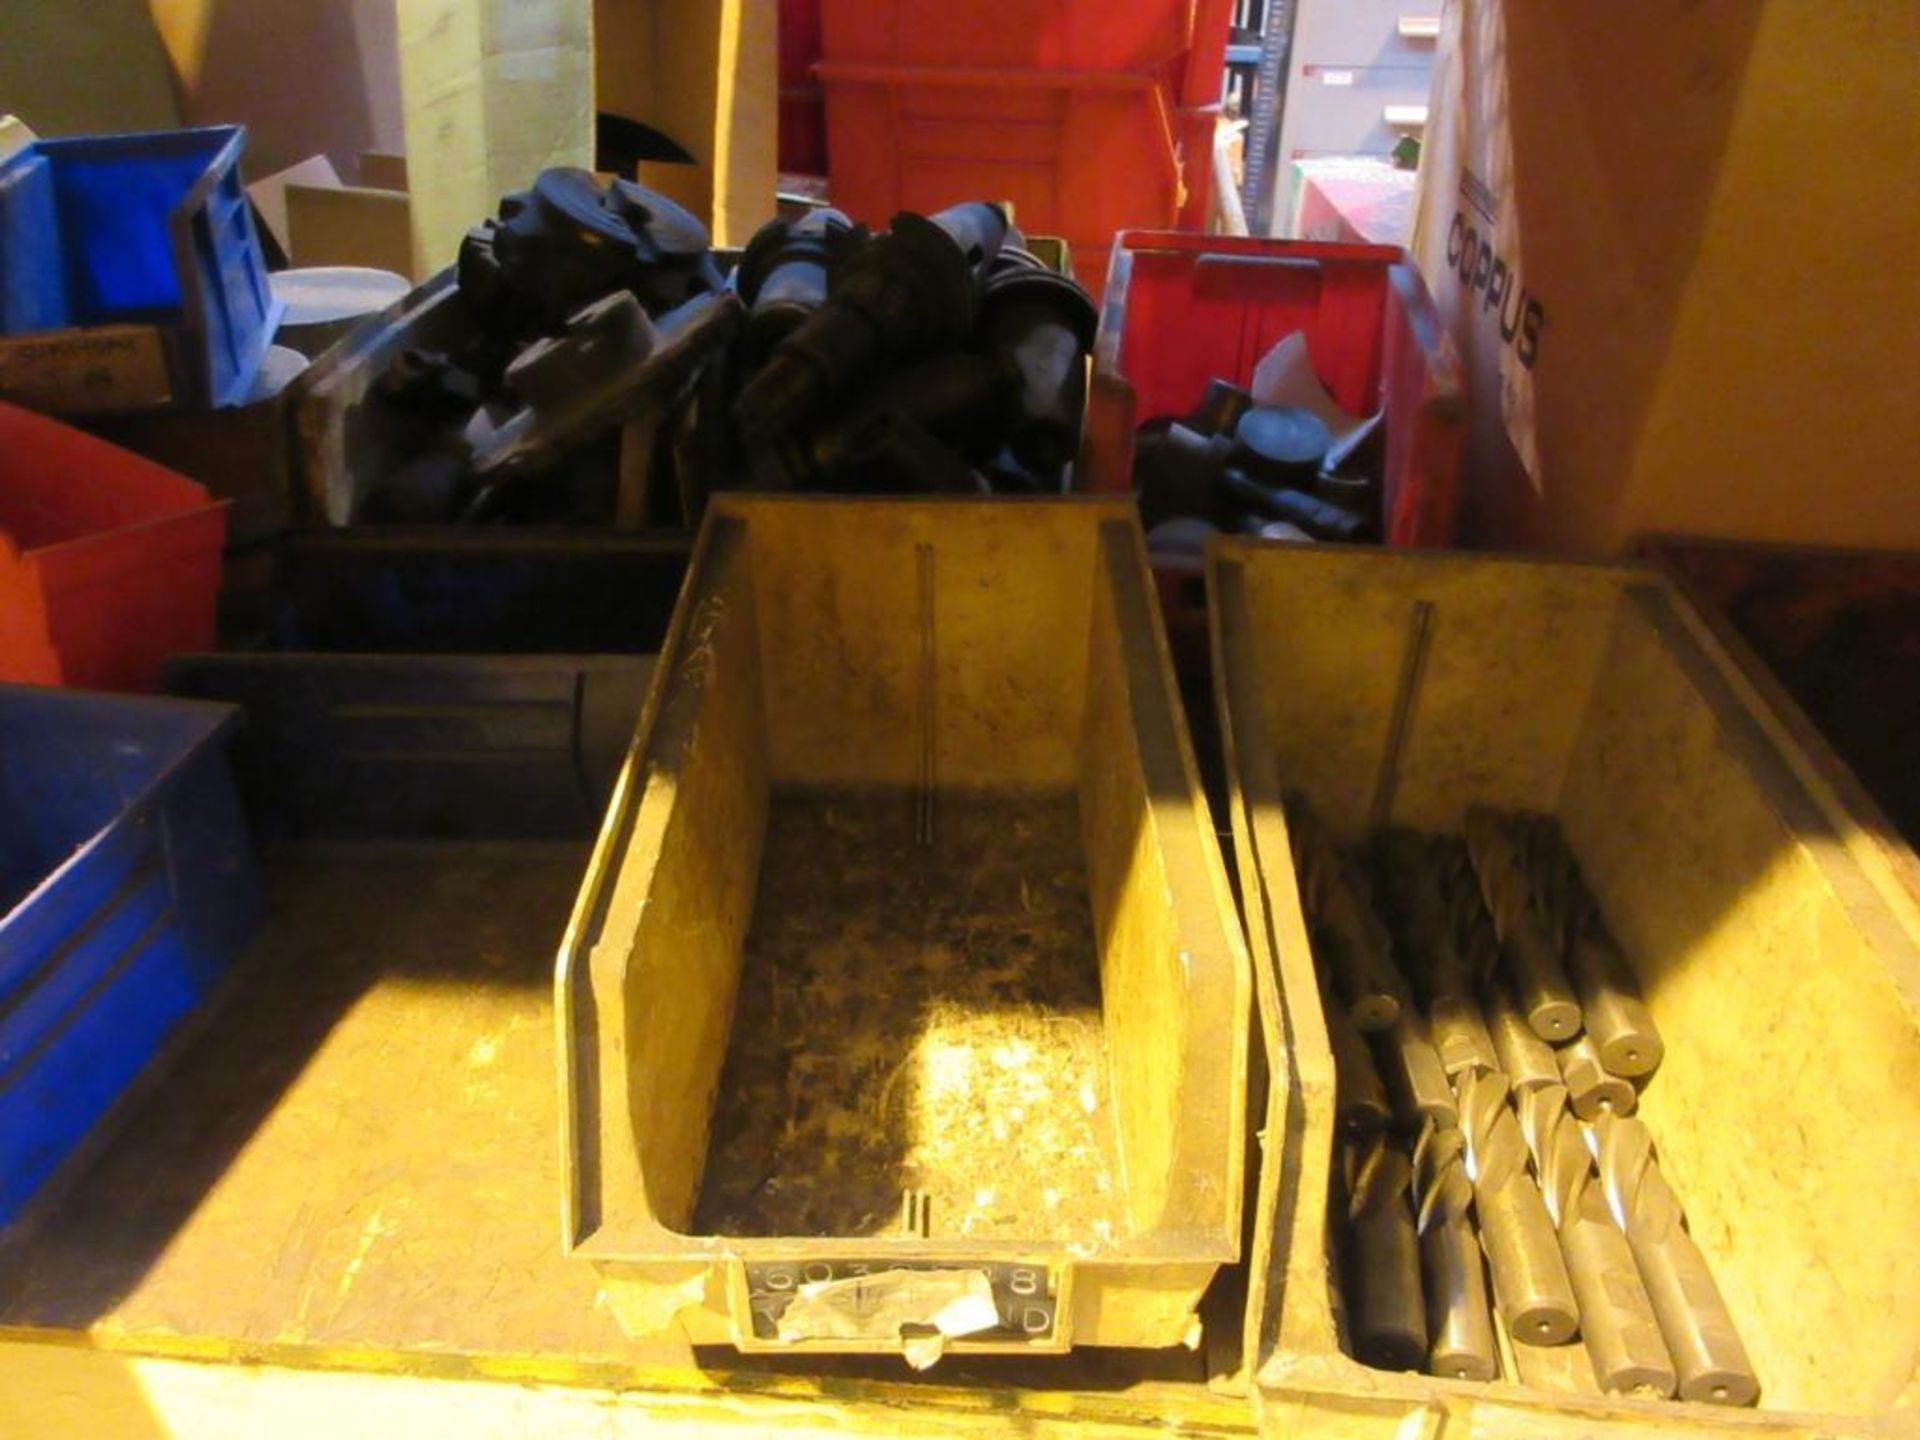 CONTENTS OF (22) SECTIONS PALLET RACK: ASSORTED ABRASIVES, SUNNEN STONES, TOOL BITS, DOVETAIL CUTTER - Image 34 of 43